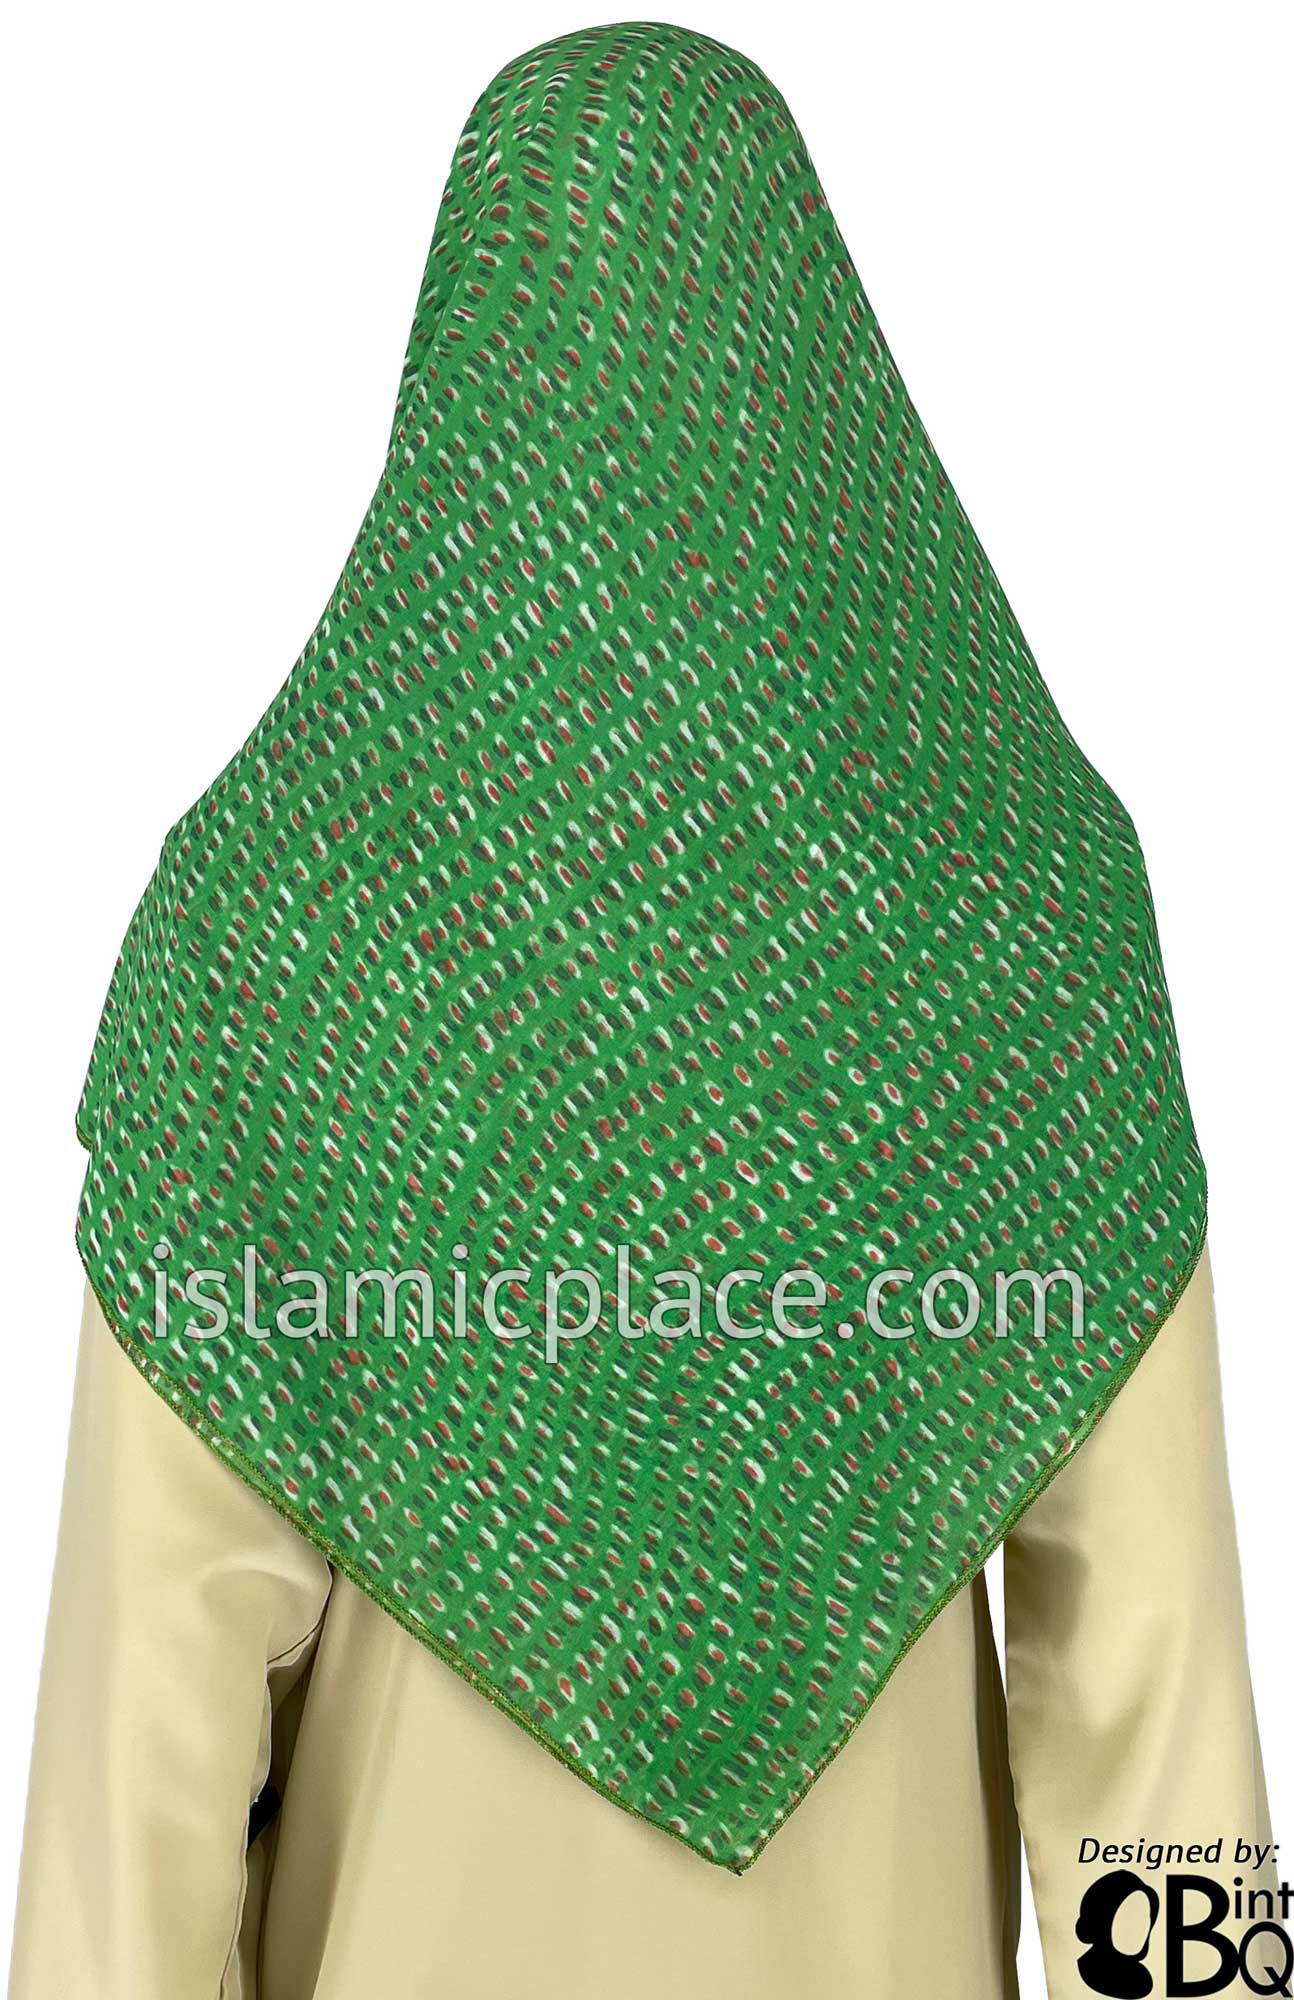 Red and White Spots on Green - 45" Square Printed Khimar